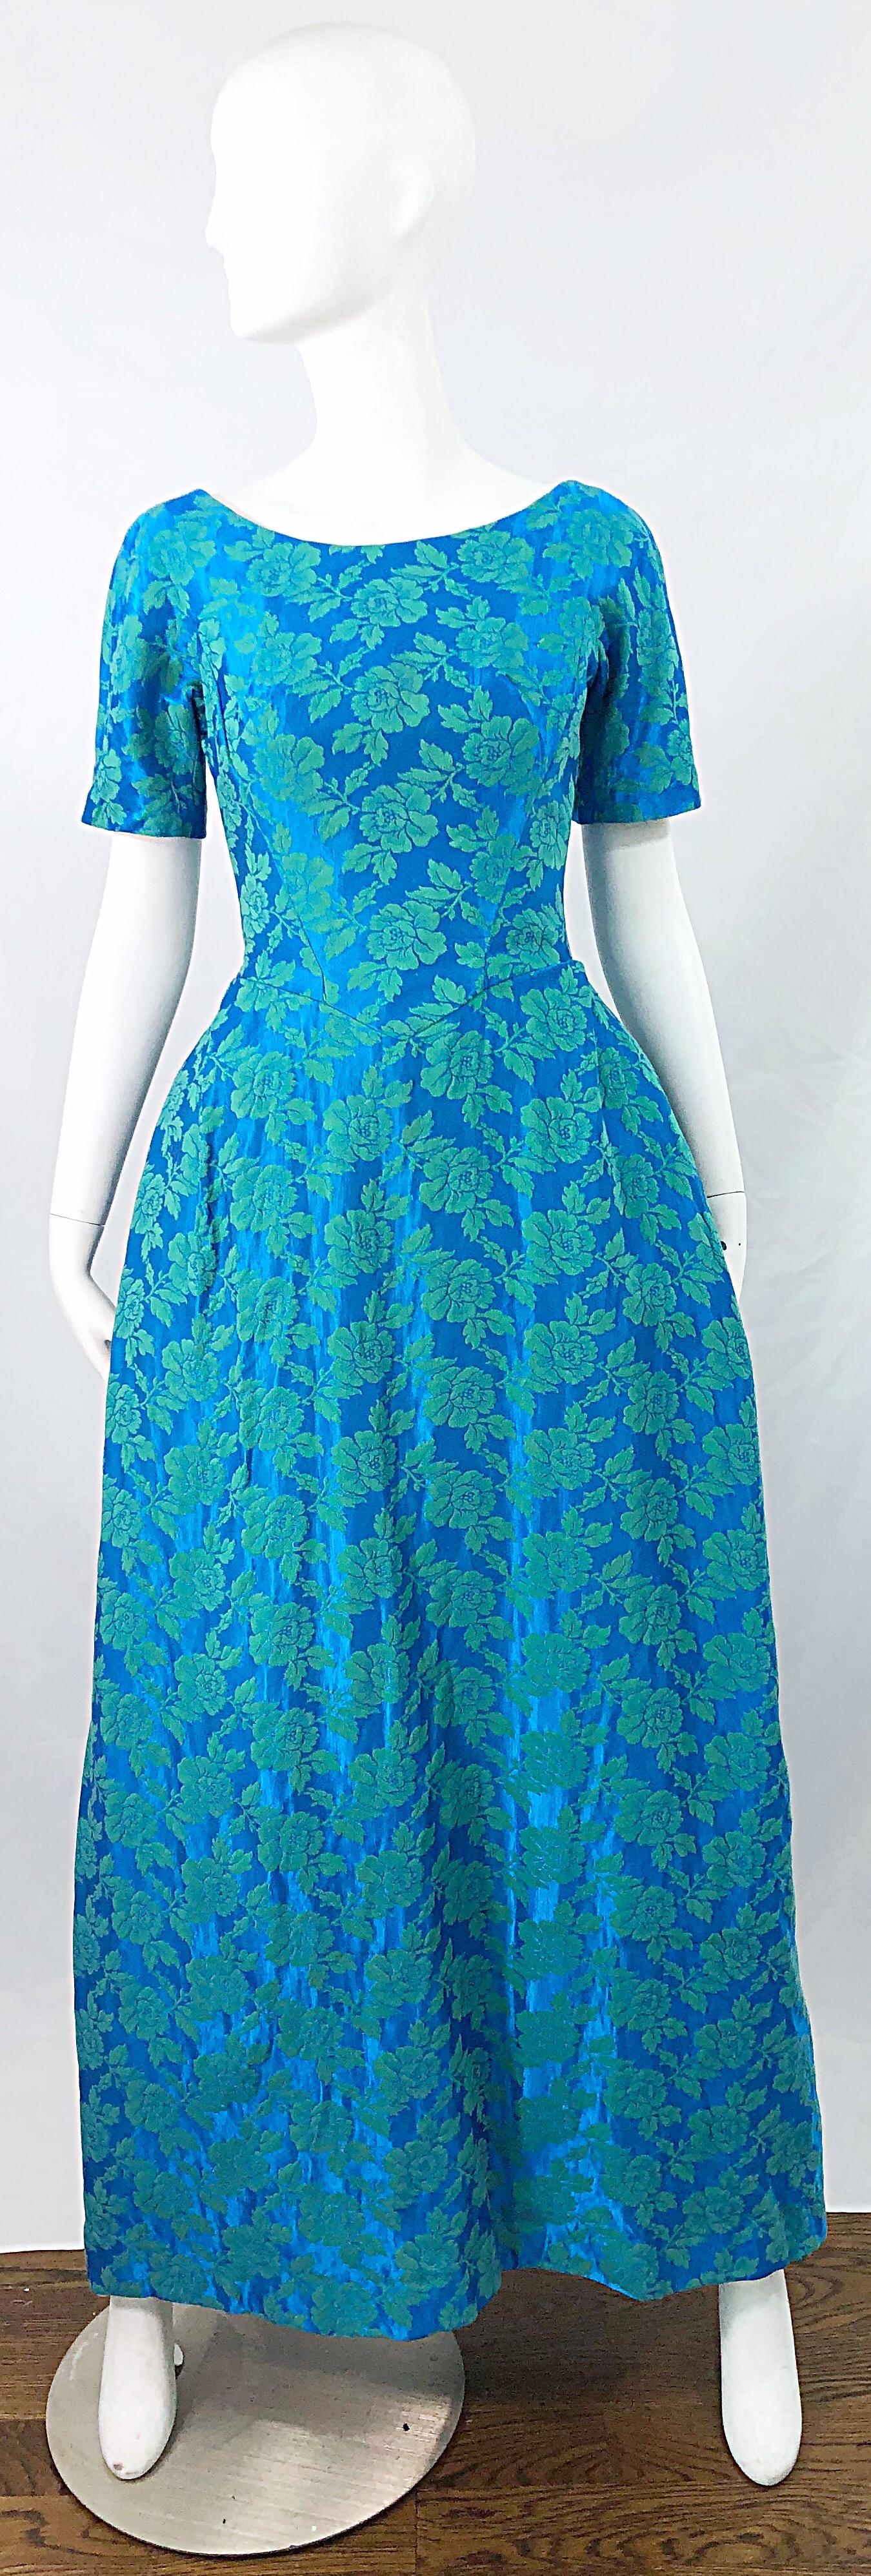 Gorgeous early 60s HOUSE OF BIANCHI turquoise blue silk brocade short sleeve gown / dress ! Features a vibrant turquoise blue silk with lighter green / blue flower brocade throughout. Tailored bodice with a full forgiving skirt. Full metal zipper up